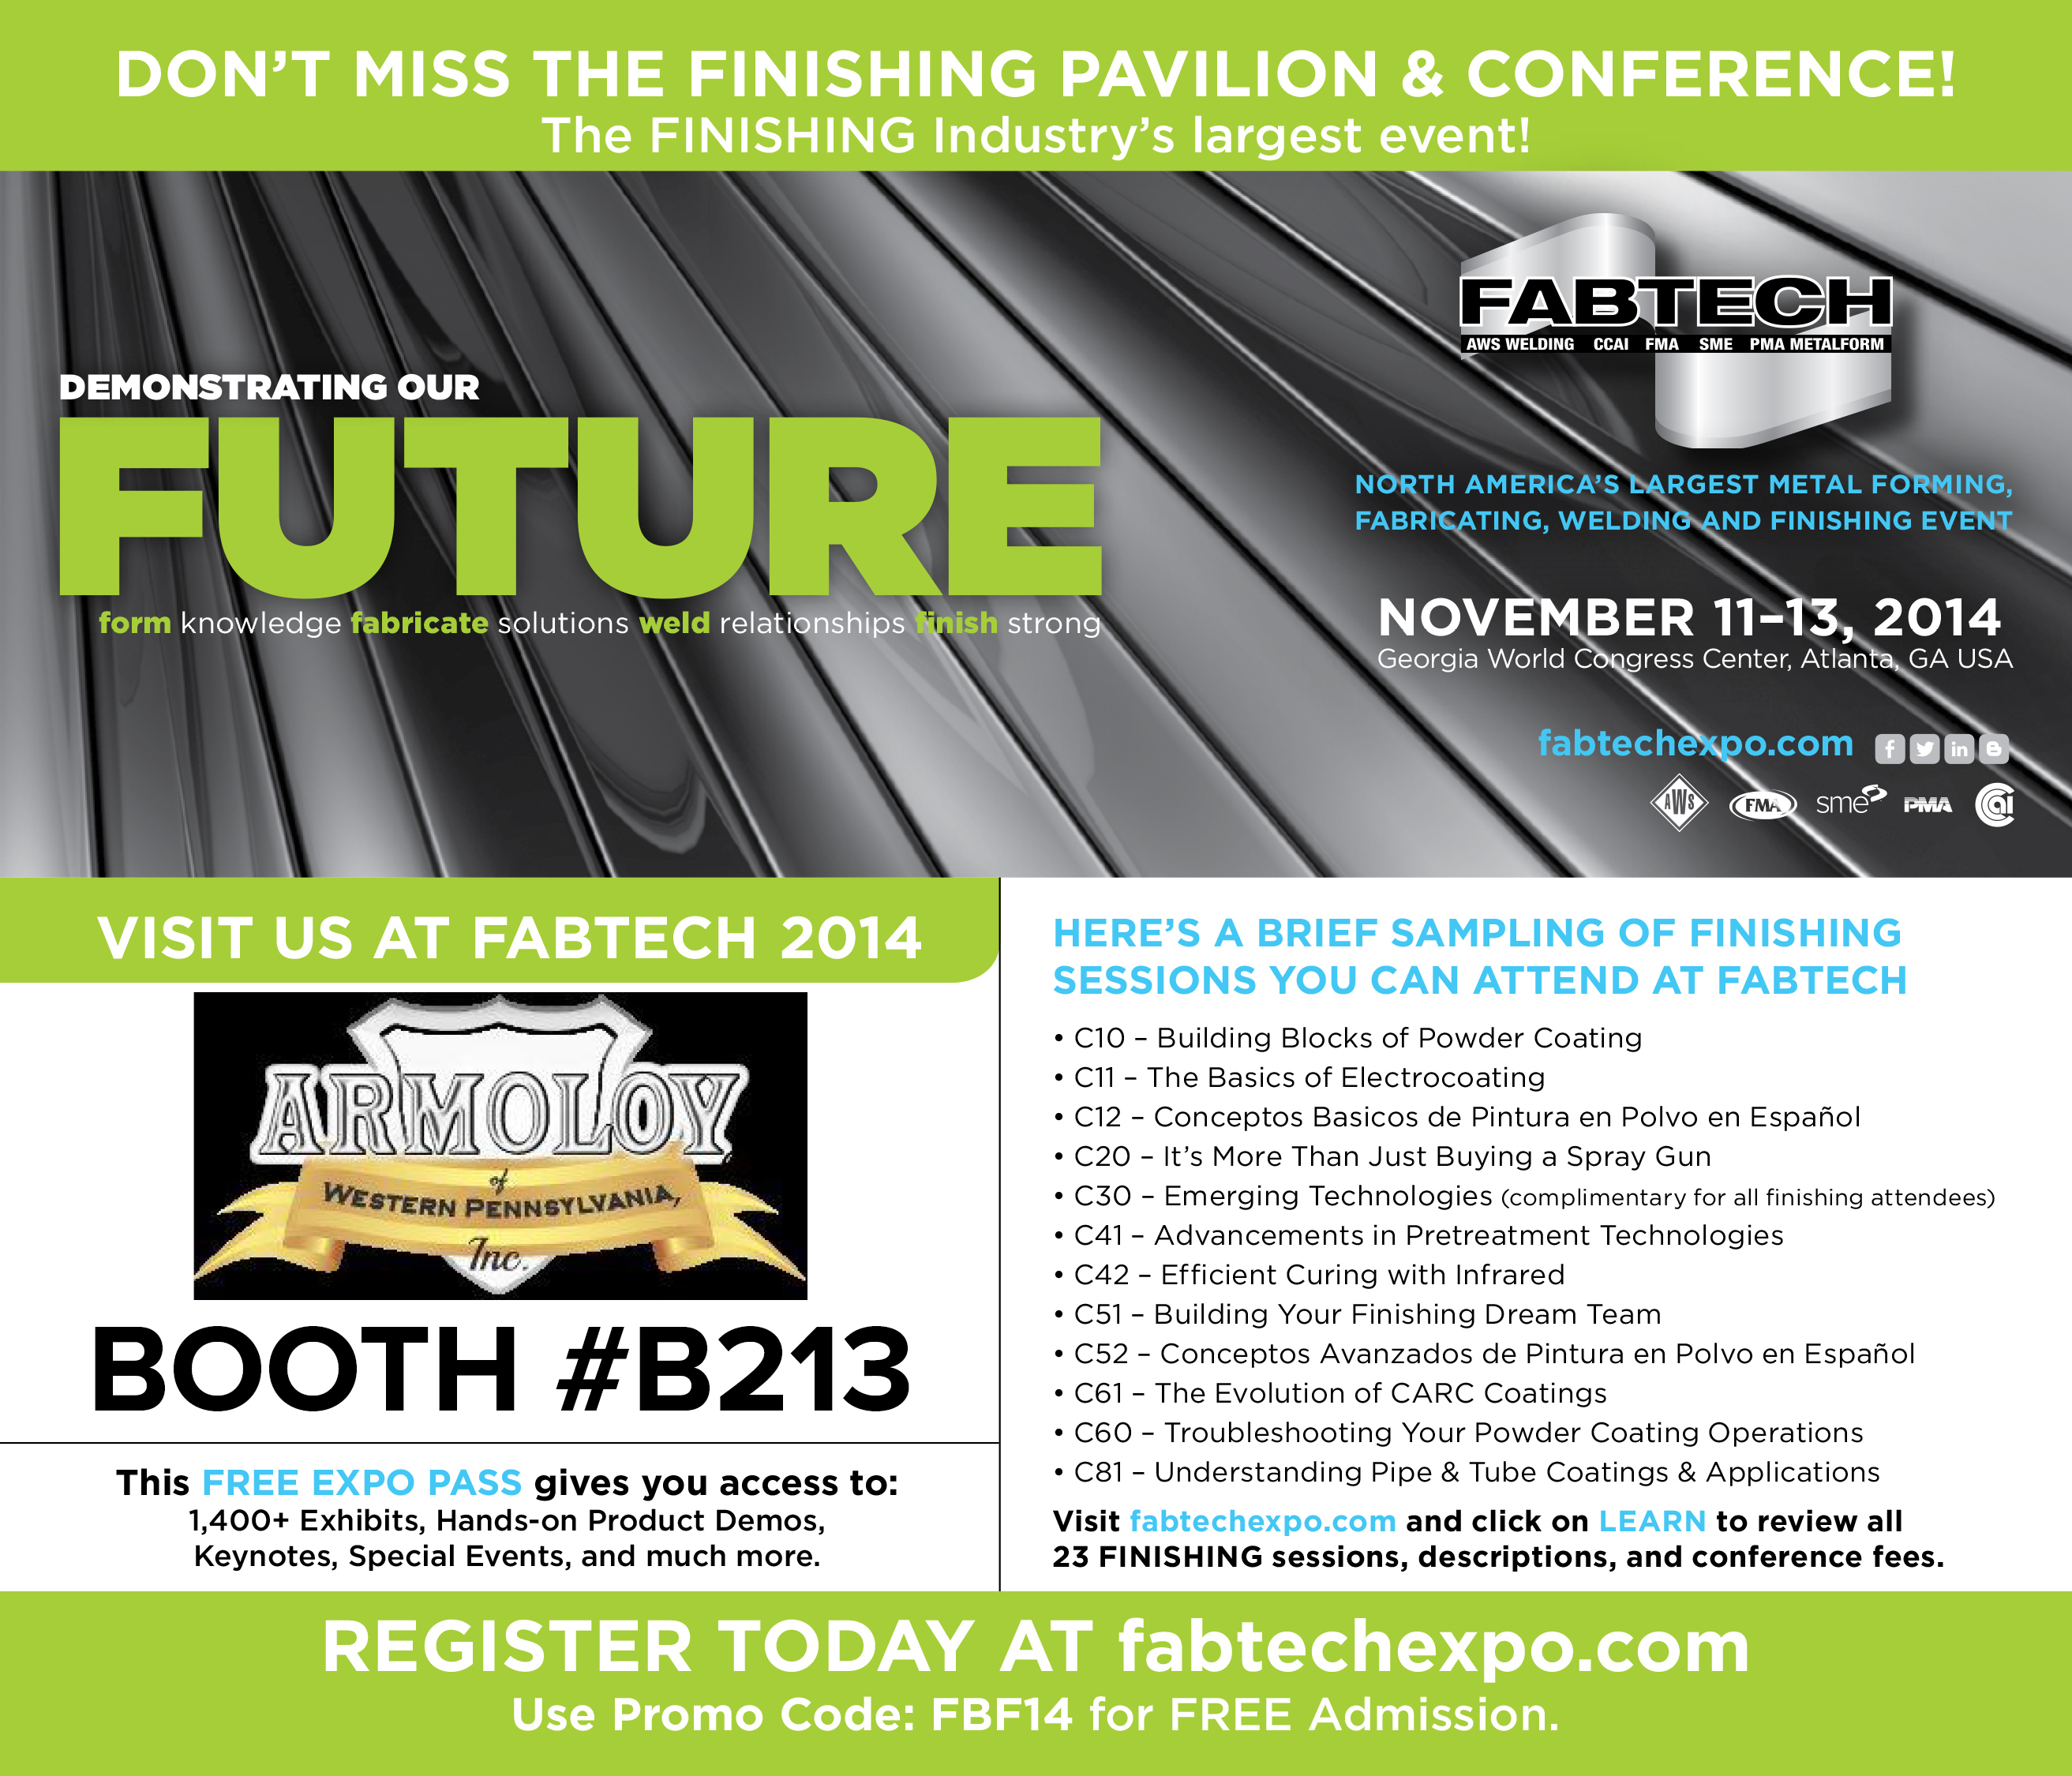 FABTECH 2014: The Event for Fabricating & Finishing